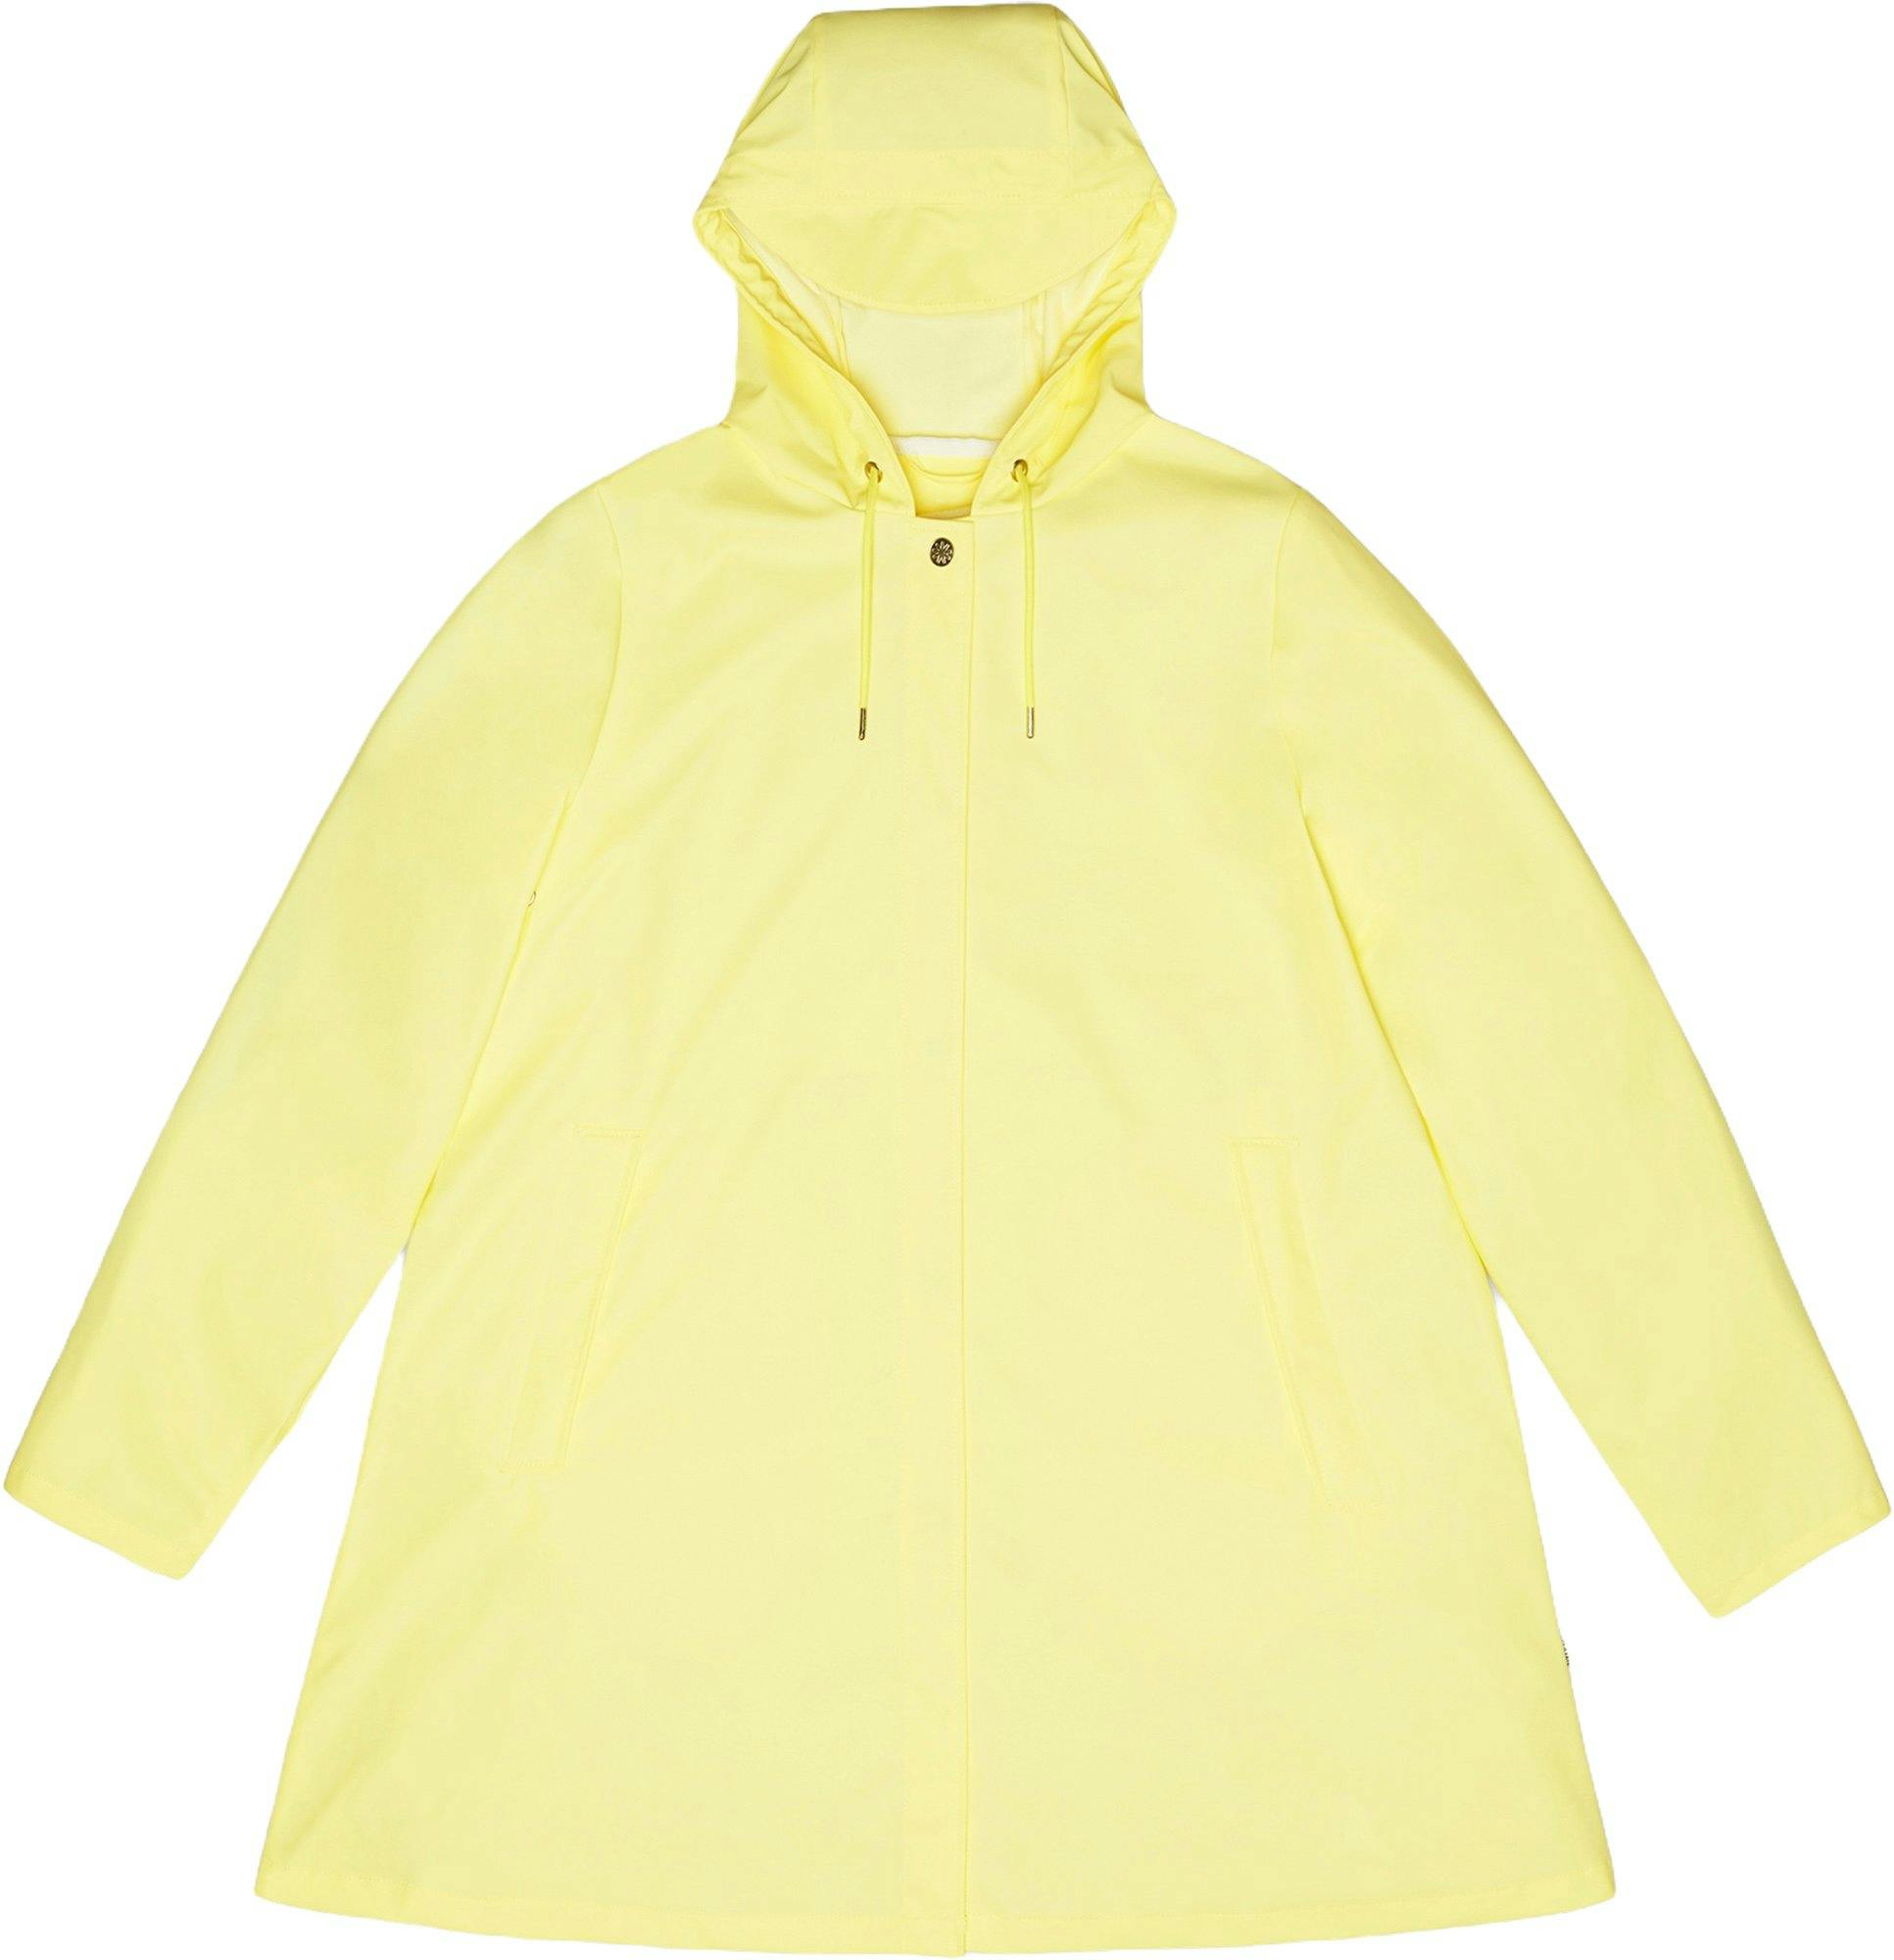 Product image for Colour Block Anorak - Women's